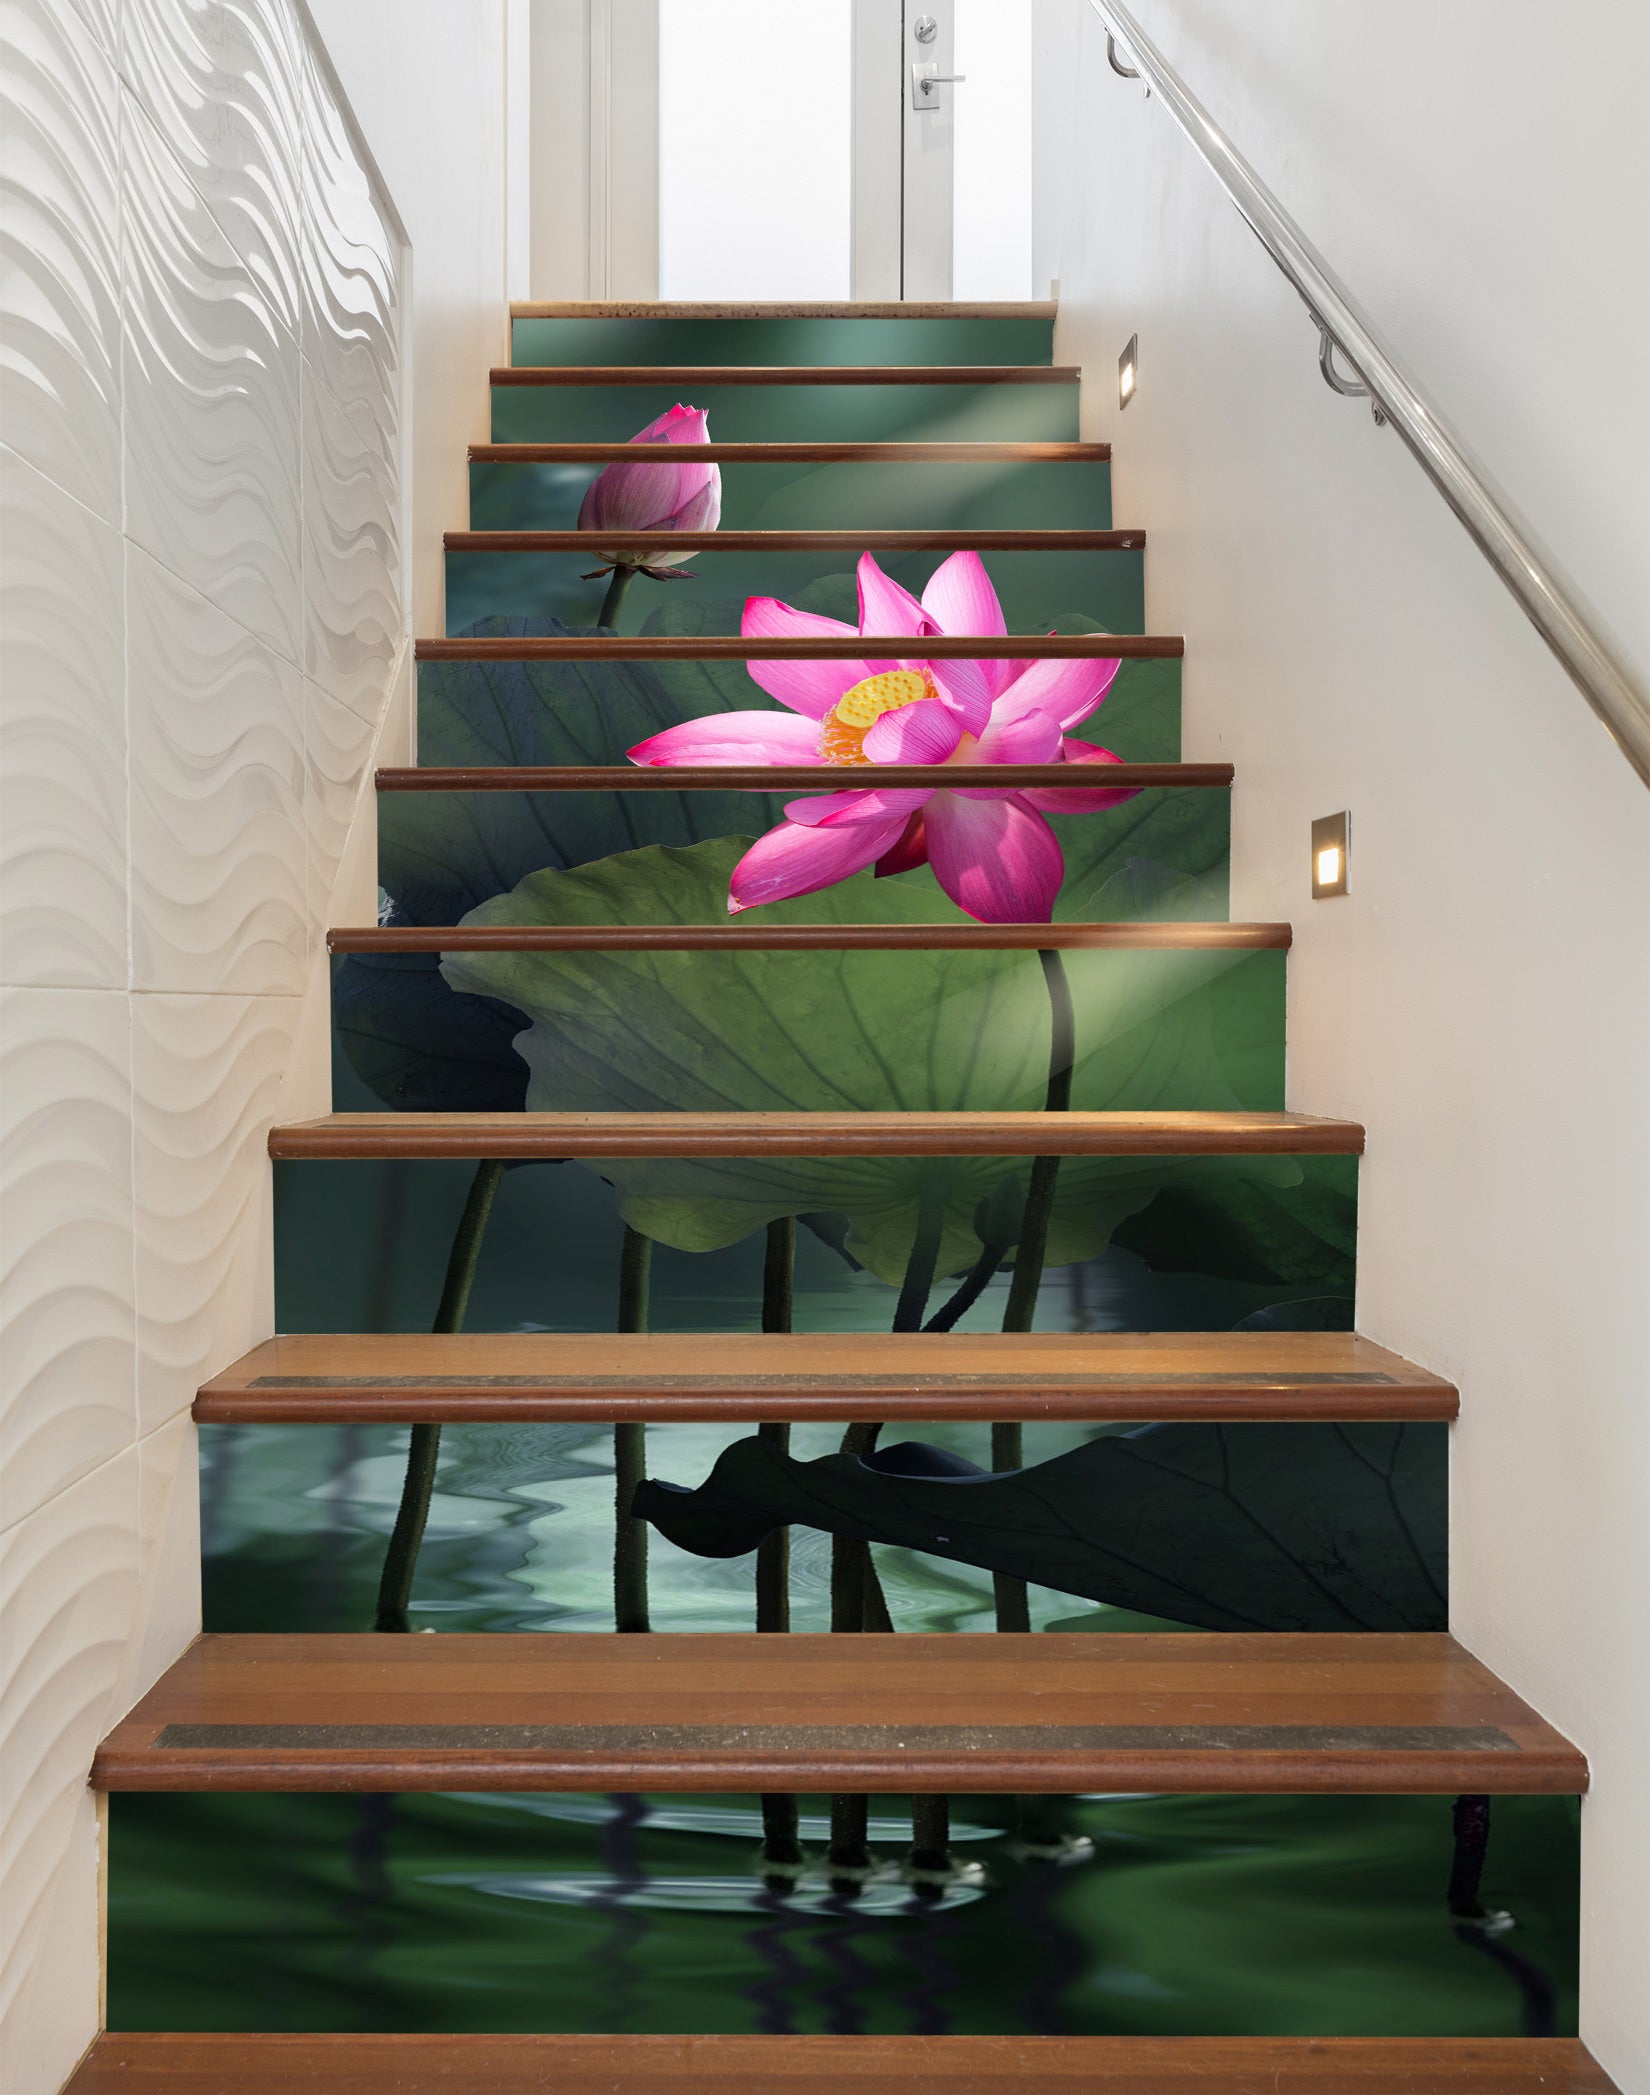 3D Budding And Blooming 531 Stair Risers